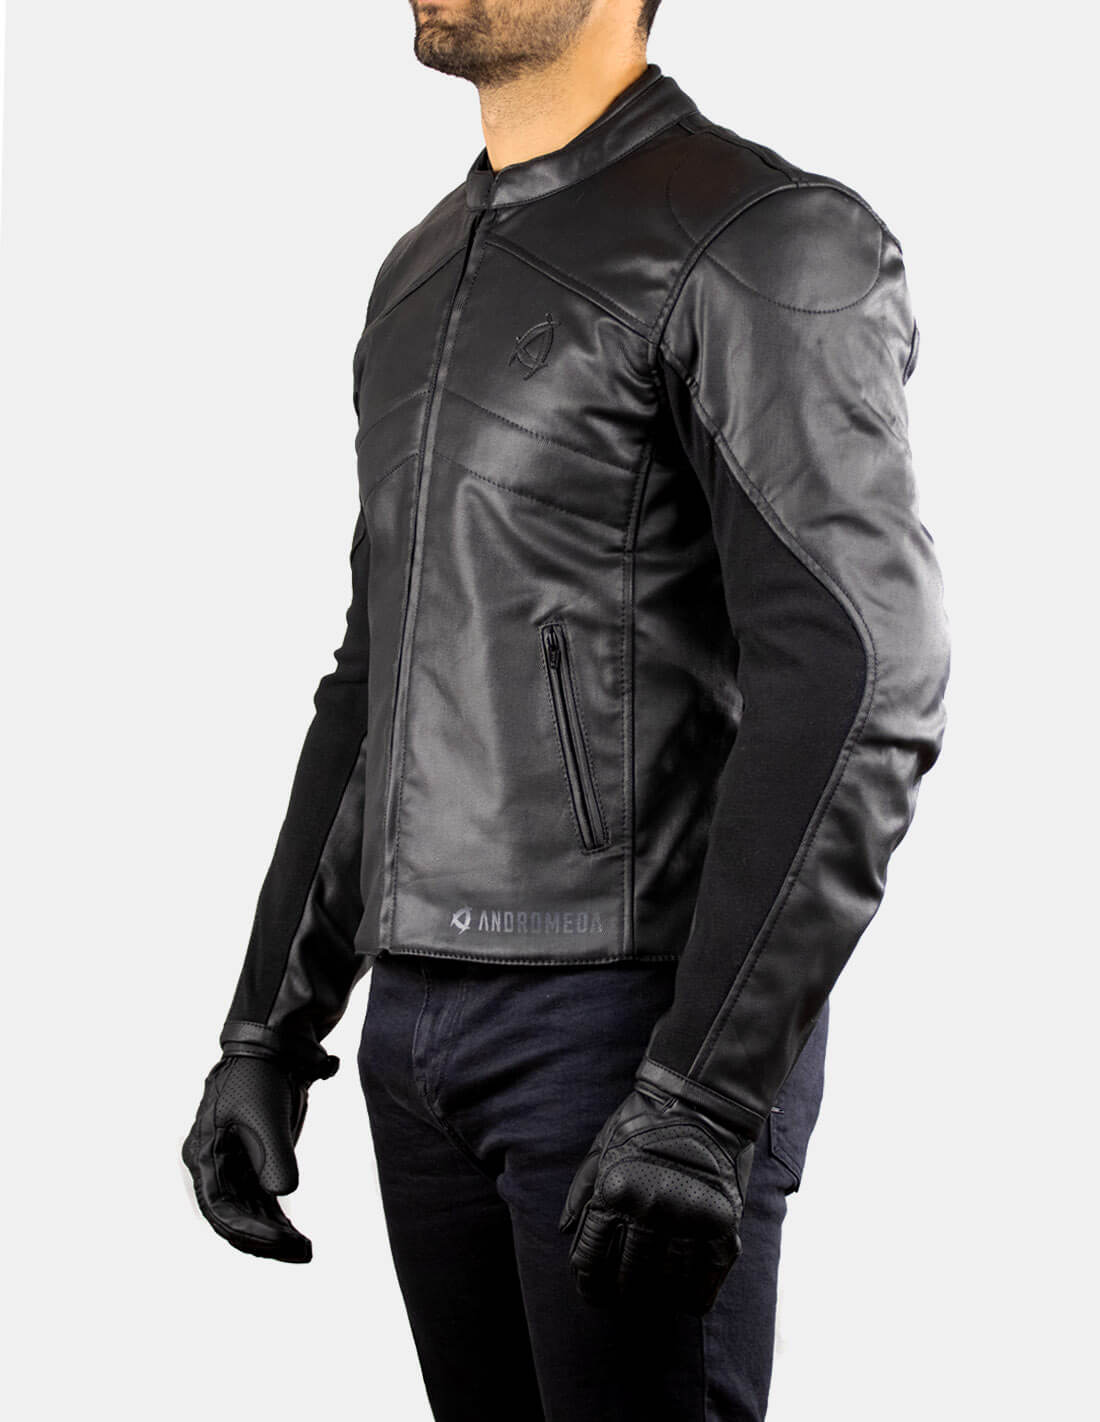 Neowise 2, Non-leather motorcycle jacket. Cafe racer with armor